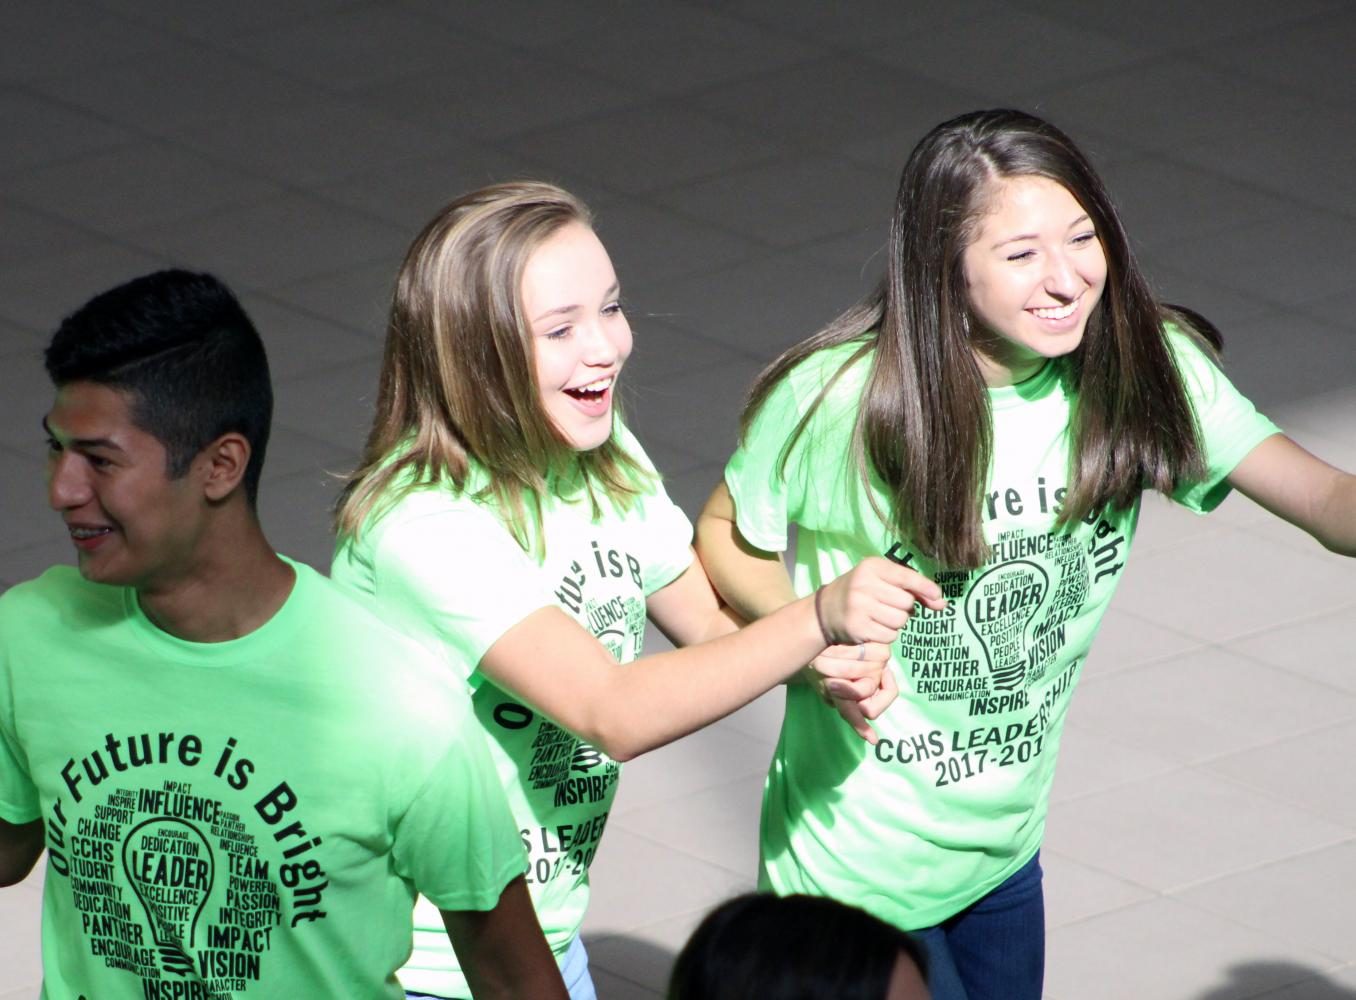 Student Council hosts Leadership Conference